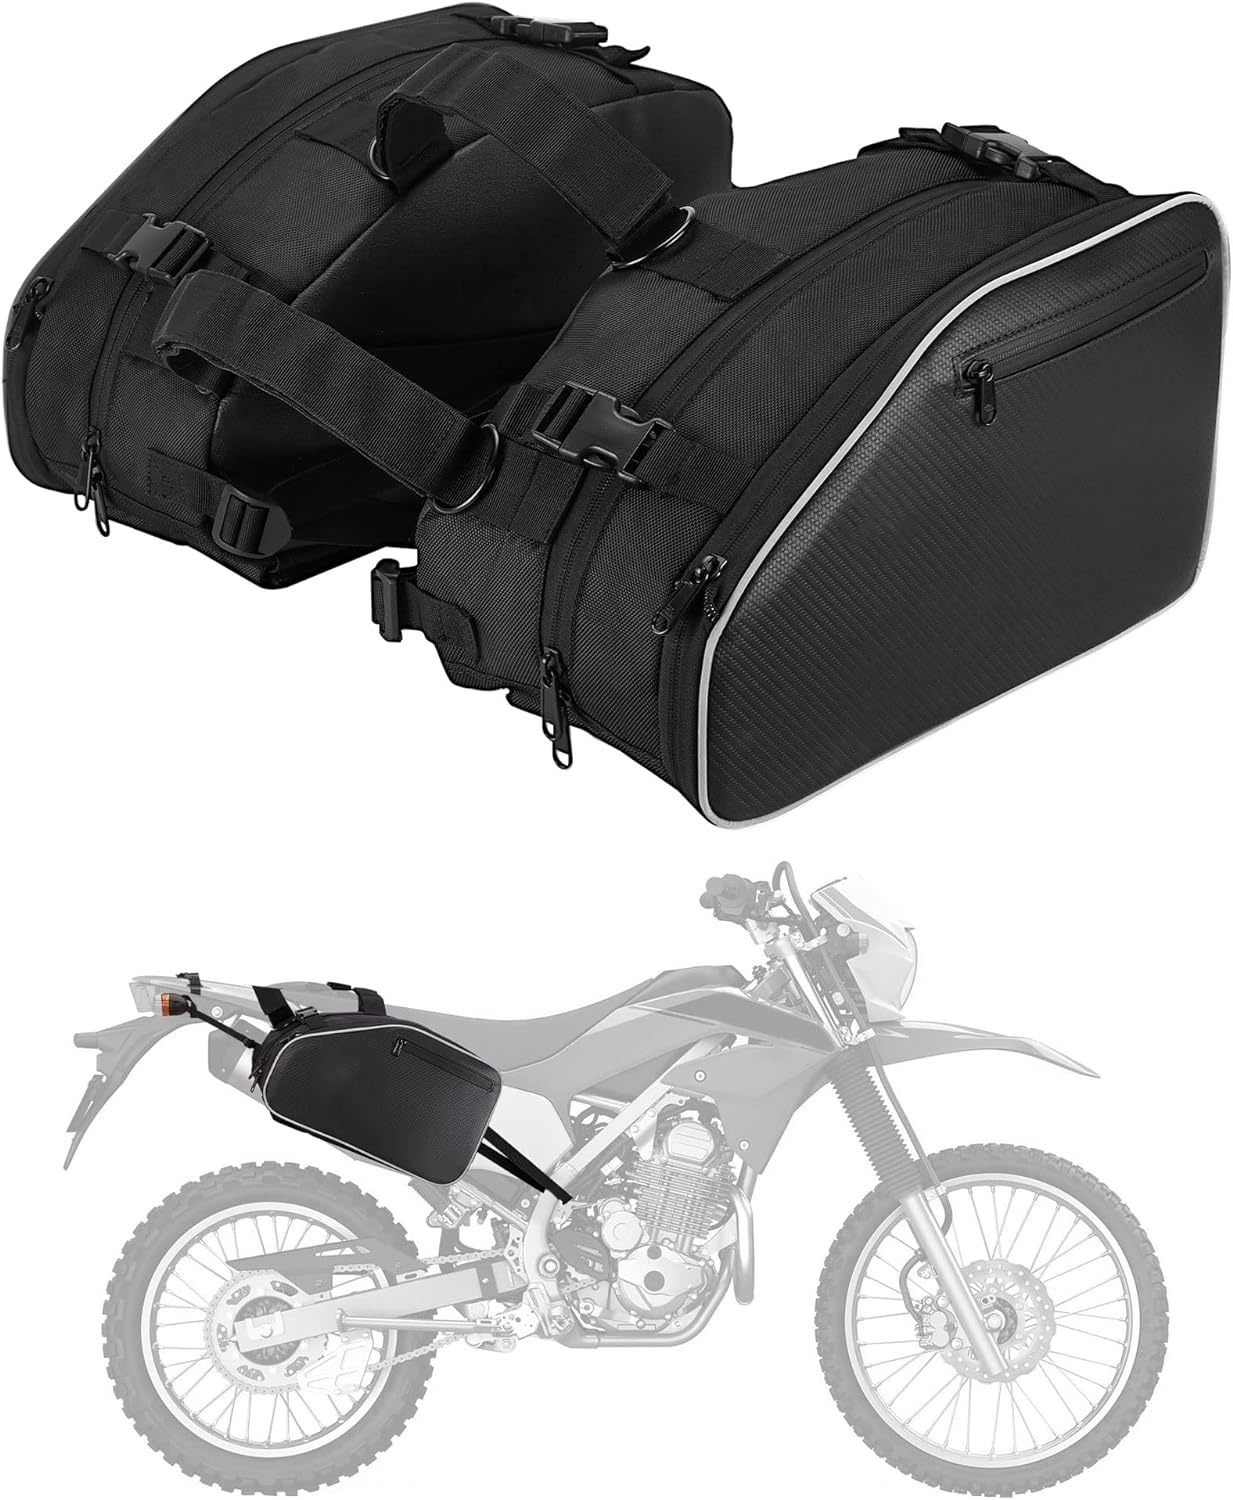 24L Large Capacity Storage Saddlebags with Rain Covers for Motorcycle Dirt Bike Dual Sport Motorcross Motorbike Racing Mountain Off-Road, Motorcycle Accessories